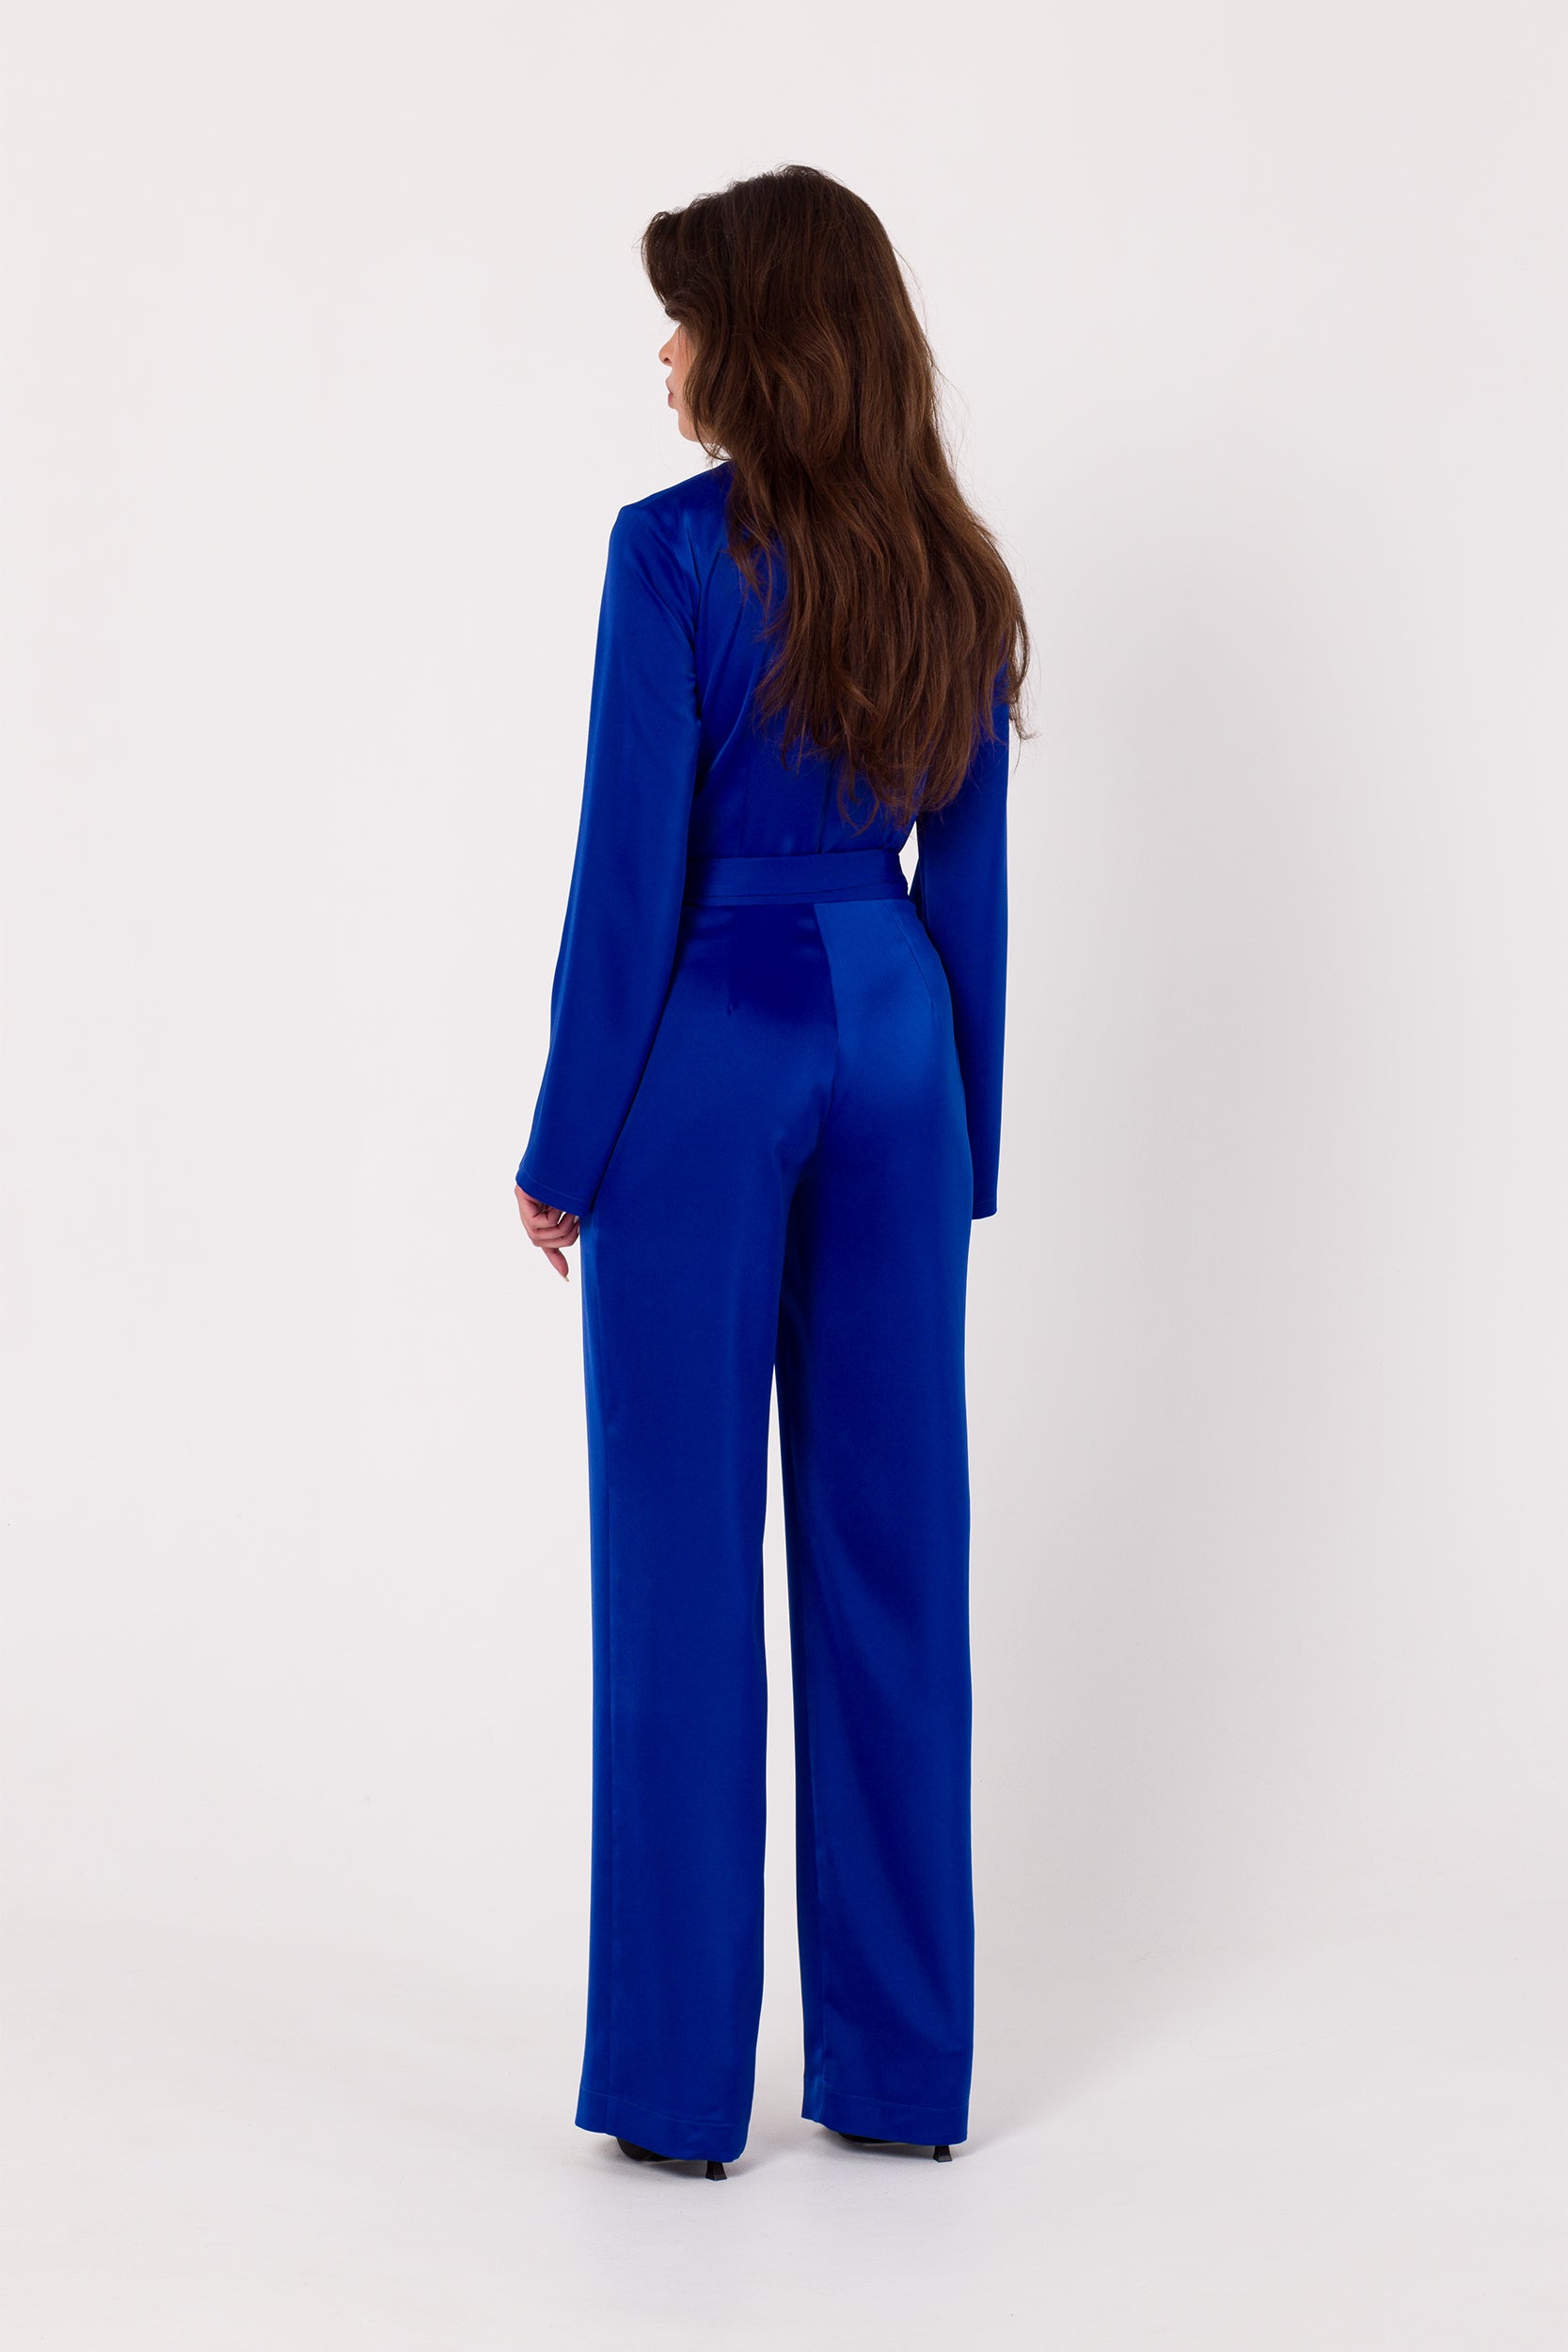 Long Sleeve Blue Satin Jumpsuit | Strictly In | Make a statement at your next event with our Long Sleeve Satin Jumpsuit. Crafted from luxurious satin, it features a V-neck, long sleeves, and a tied waist for a glamorous yet comfortable look. Perfect for the party season.